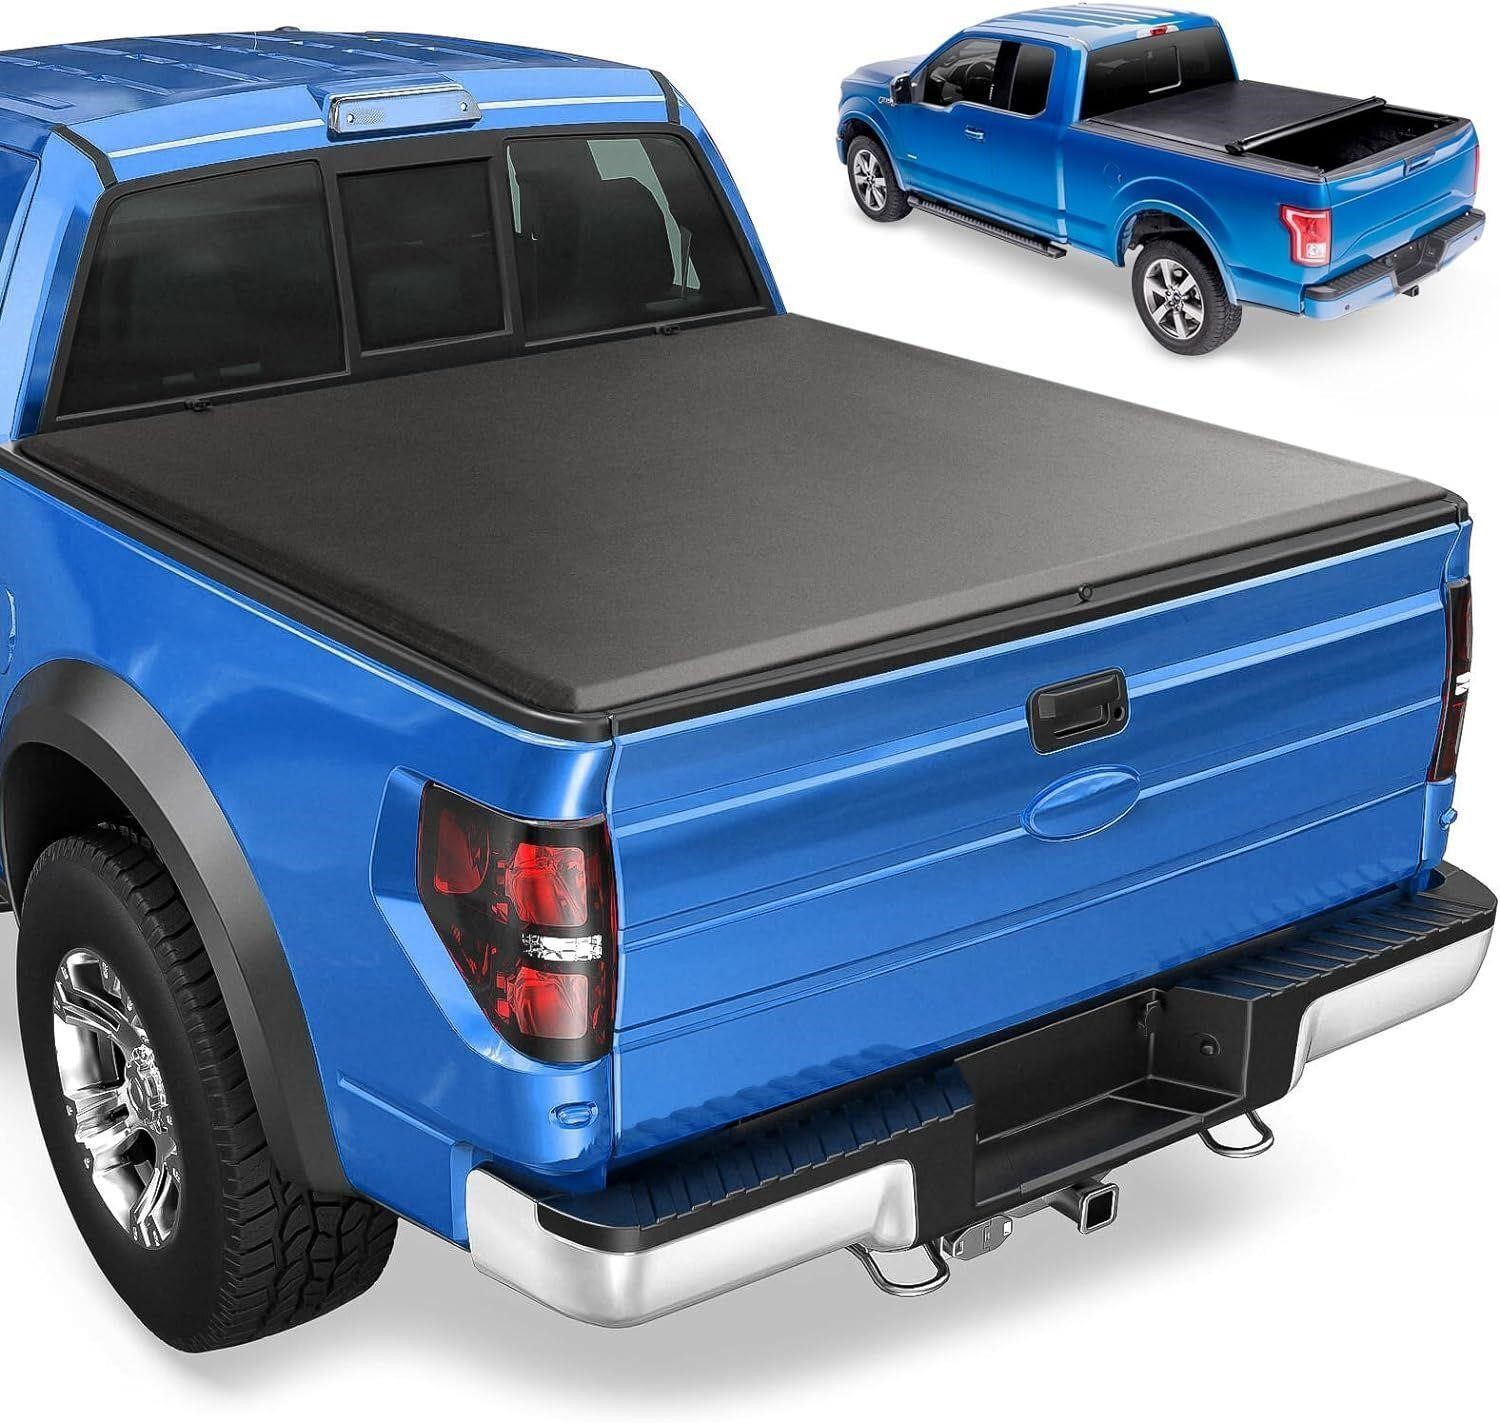 Soft Roll-up Truck Bed Tonneau Cover Ford F-150